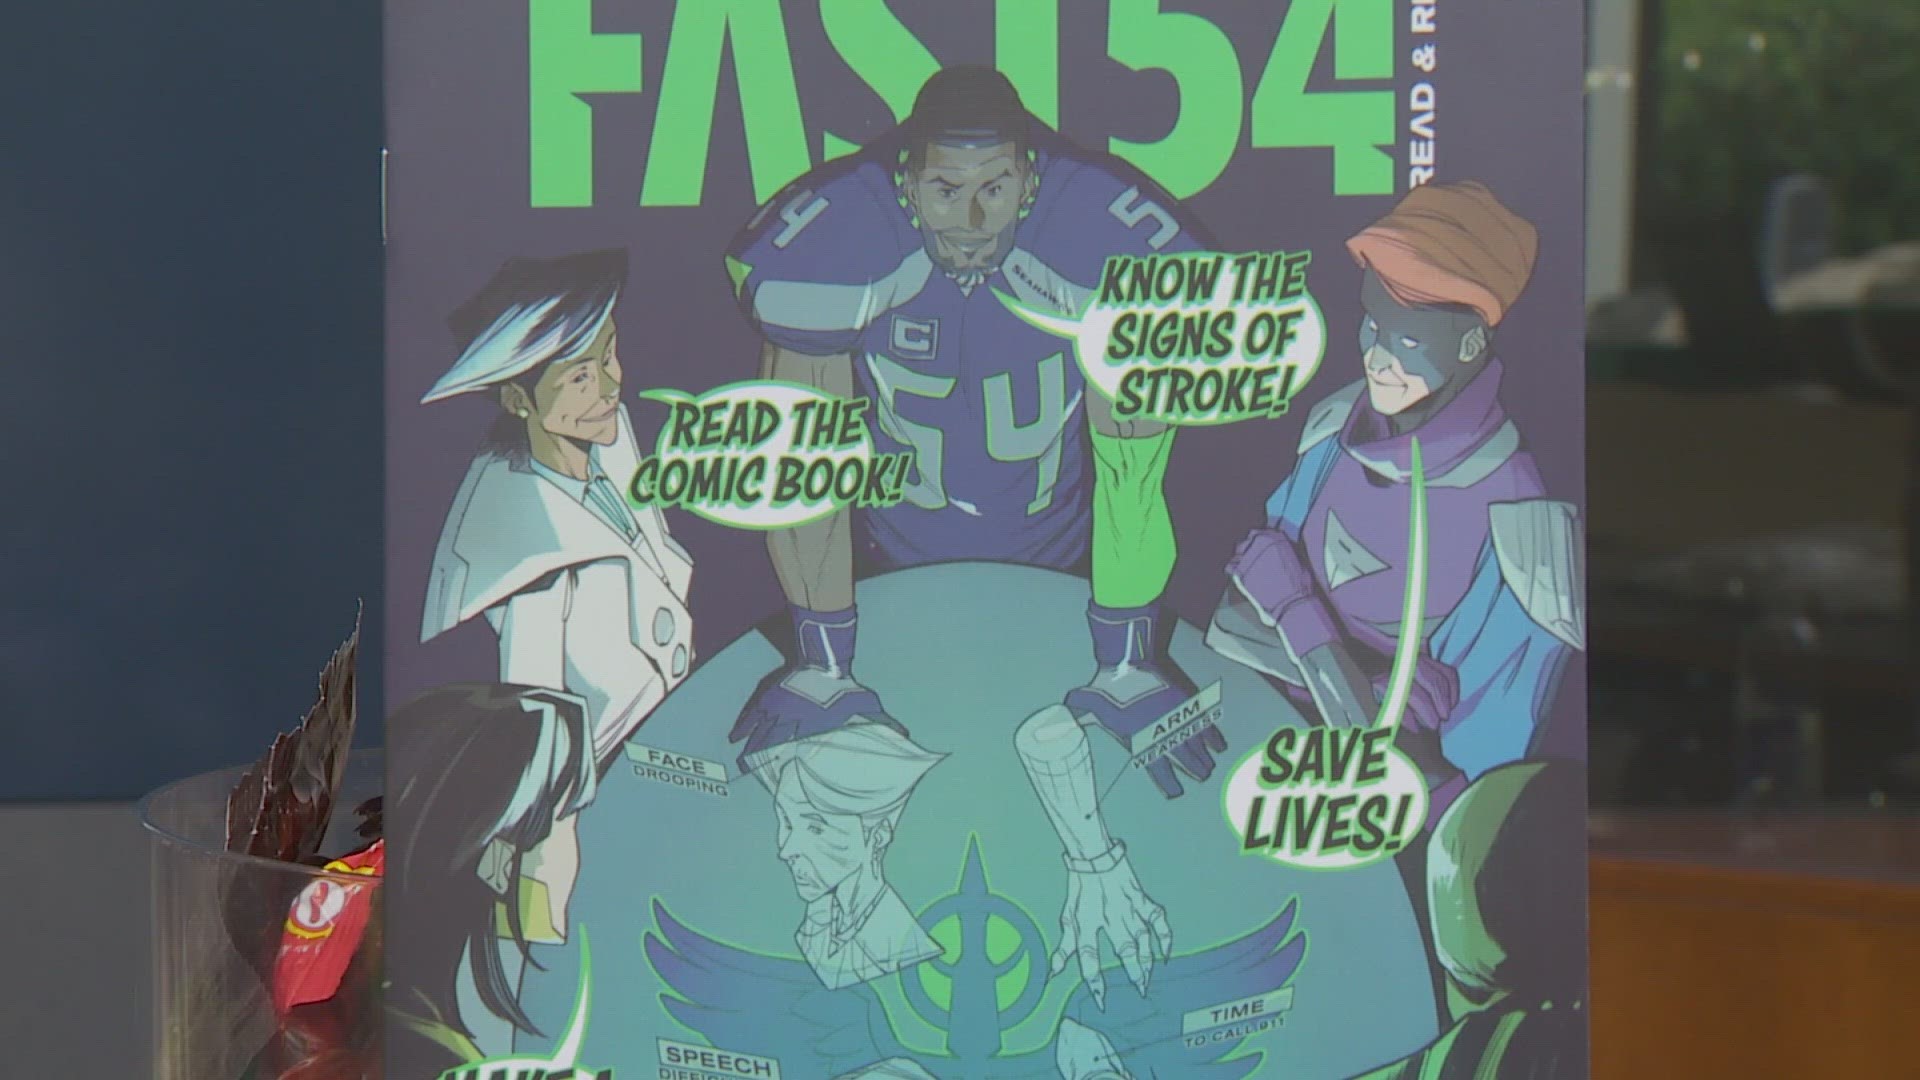 Bobby Wagner's new comic book "Fast 54" is in partnership with Virginia Mason Franciscan Health. Wagner's mother died of a stroke in 2009.